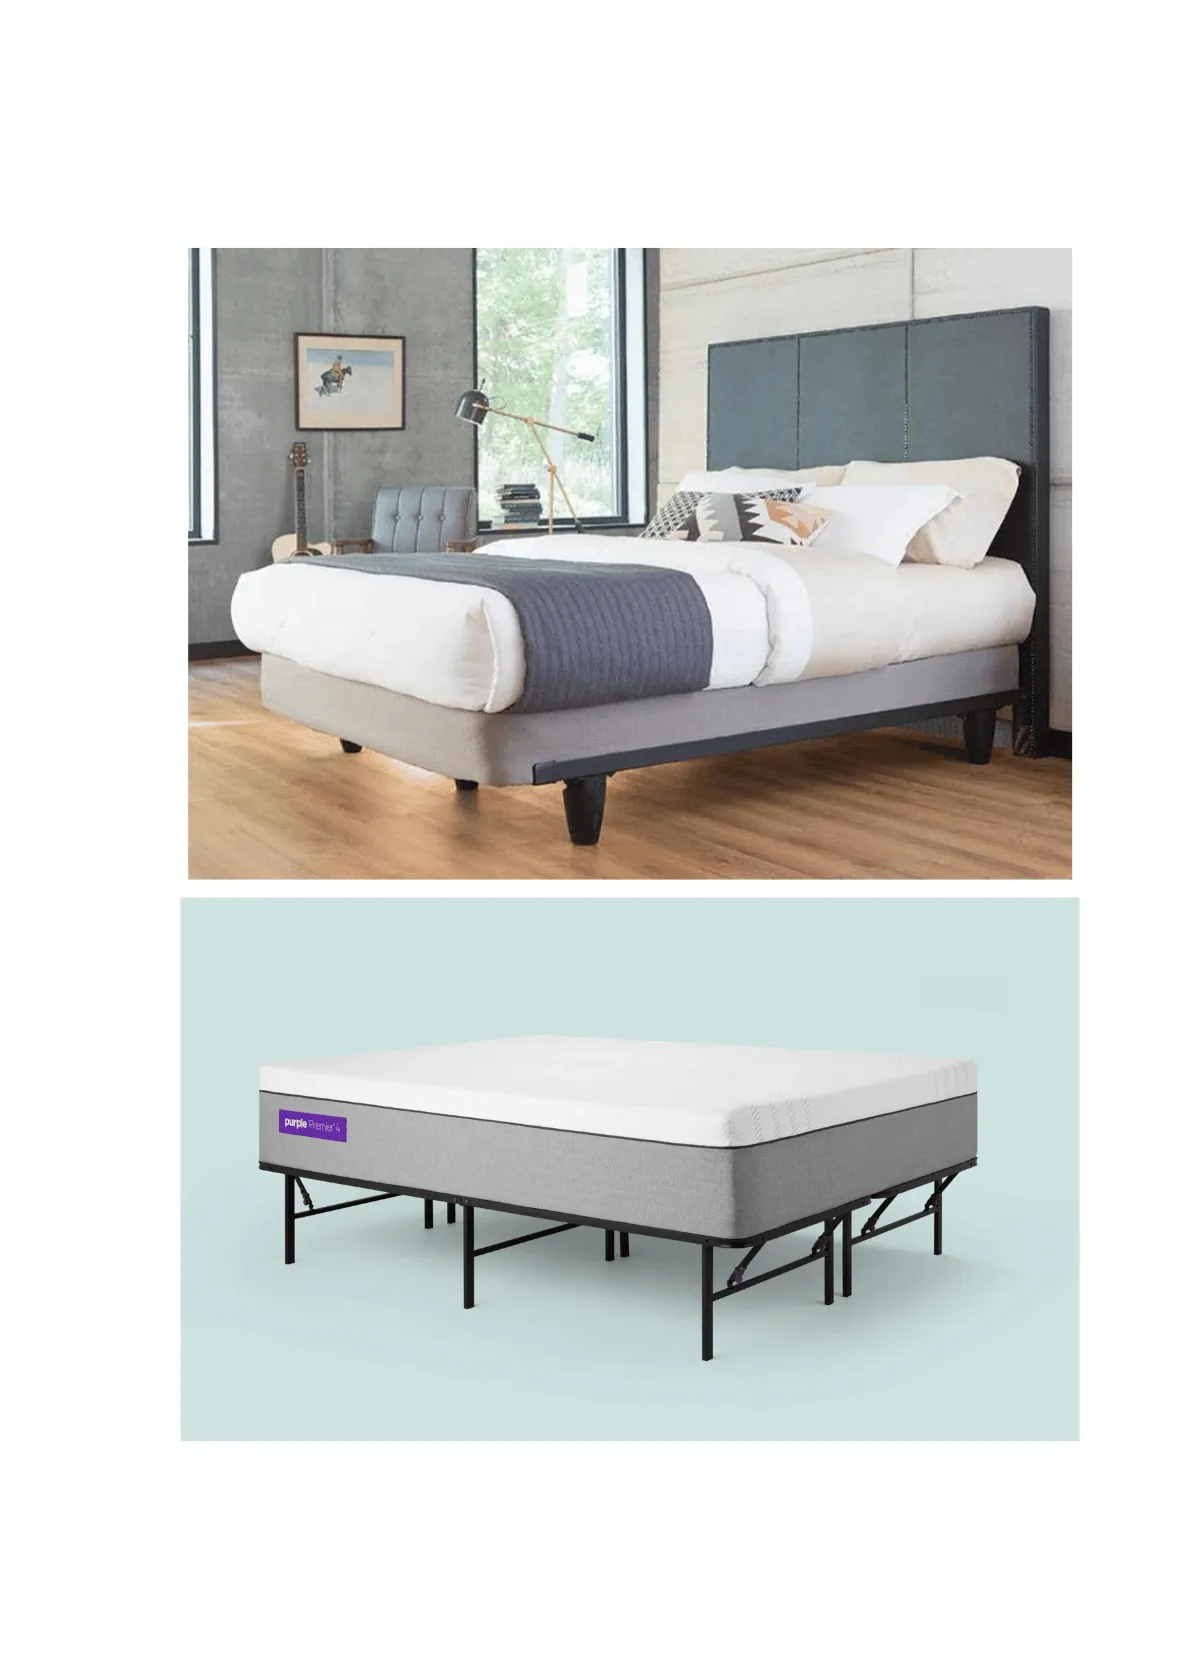 "The Best Quiet Bed Frame Picks for a Peaceful Night's Sleep"